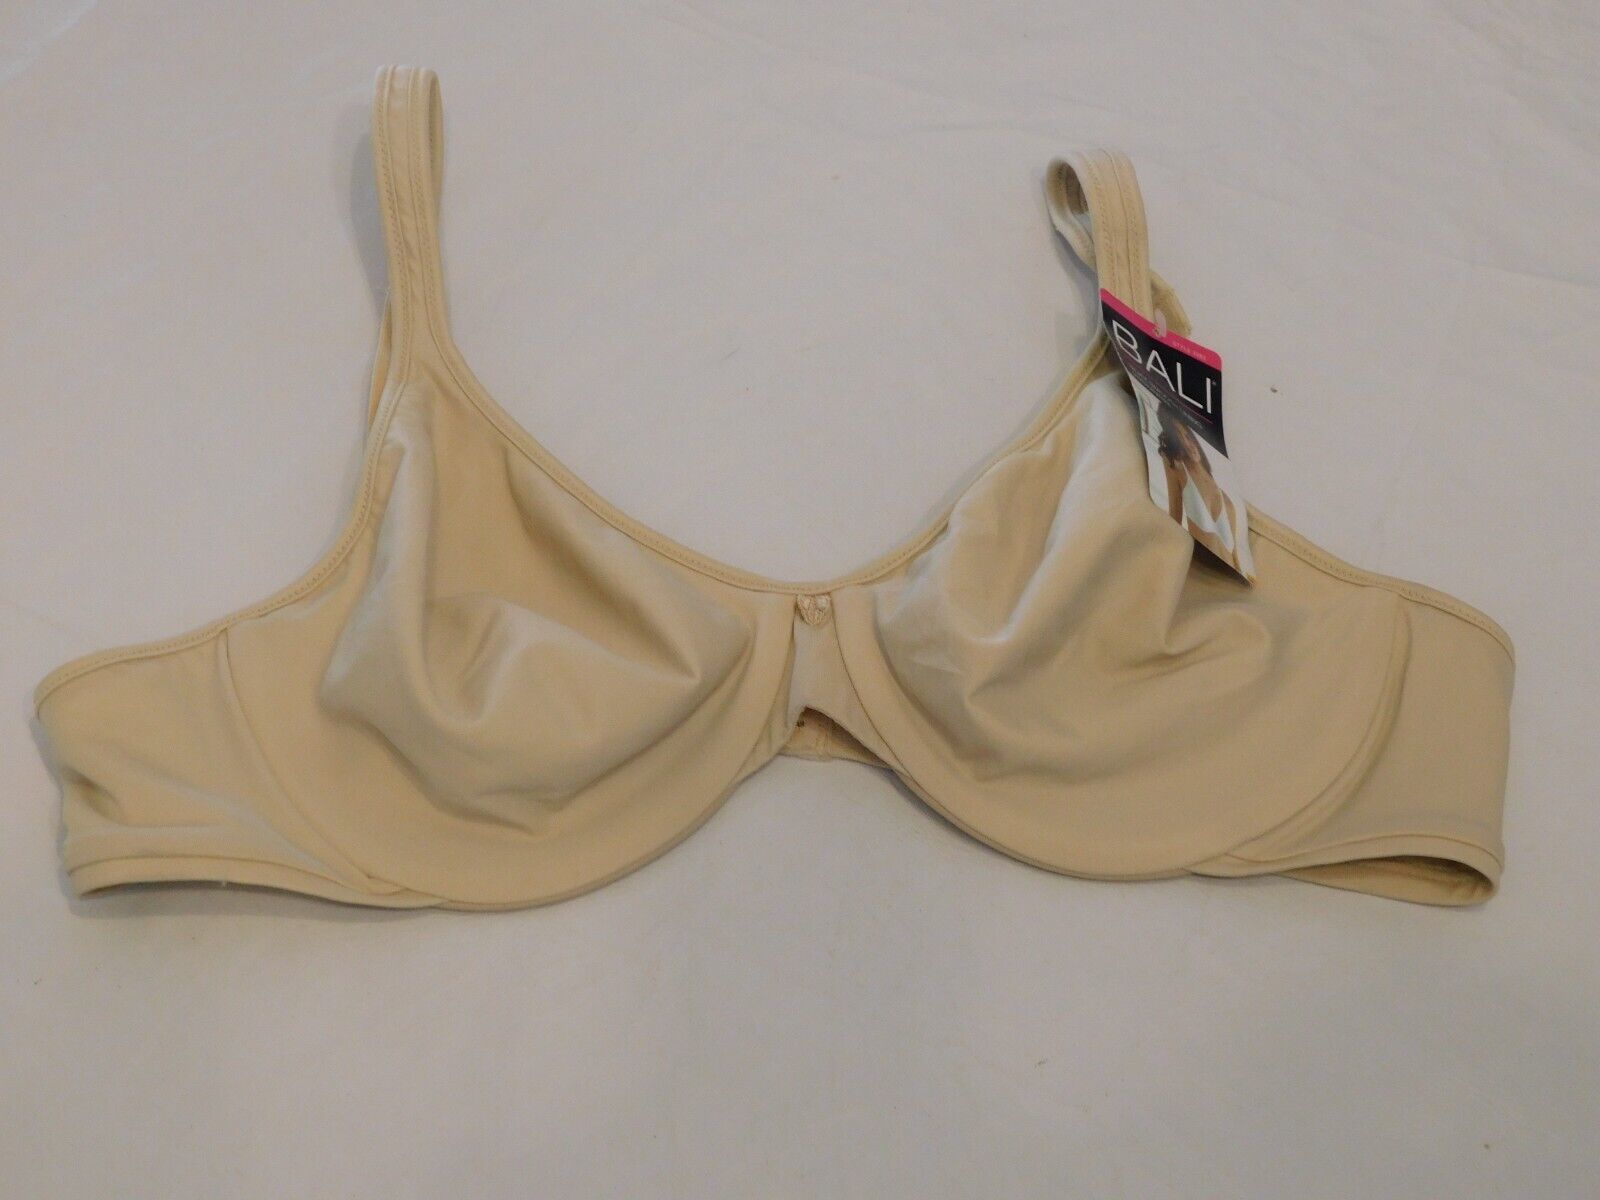 Primary image for Bali Smoothing Bra Women's Ladies Size 40B Style 3383 Silky Smooth Lining NWT